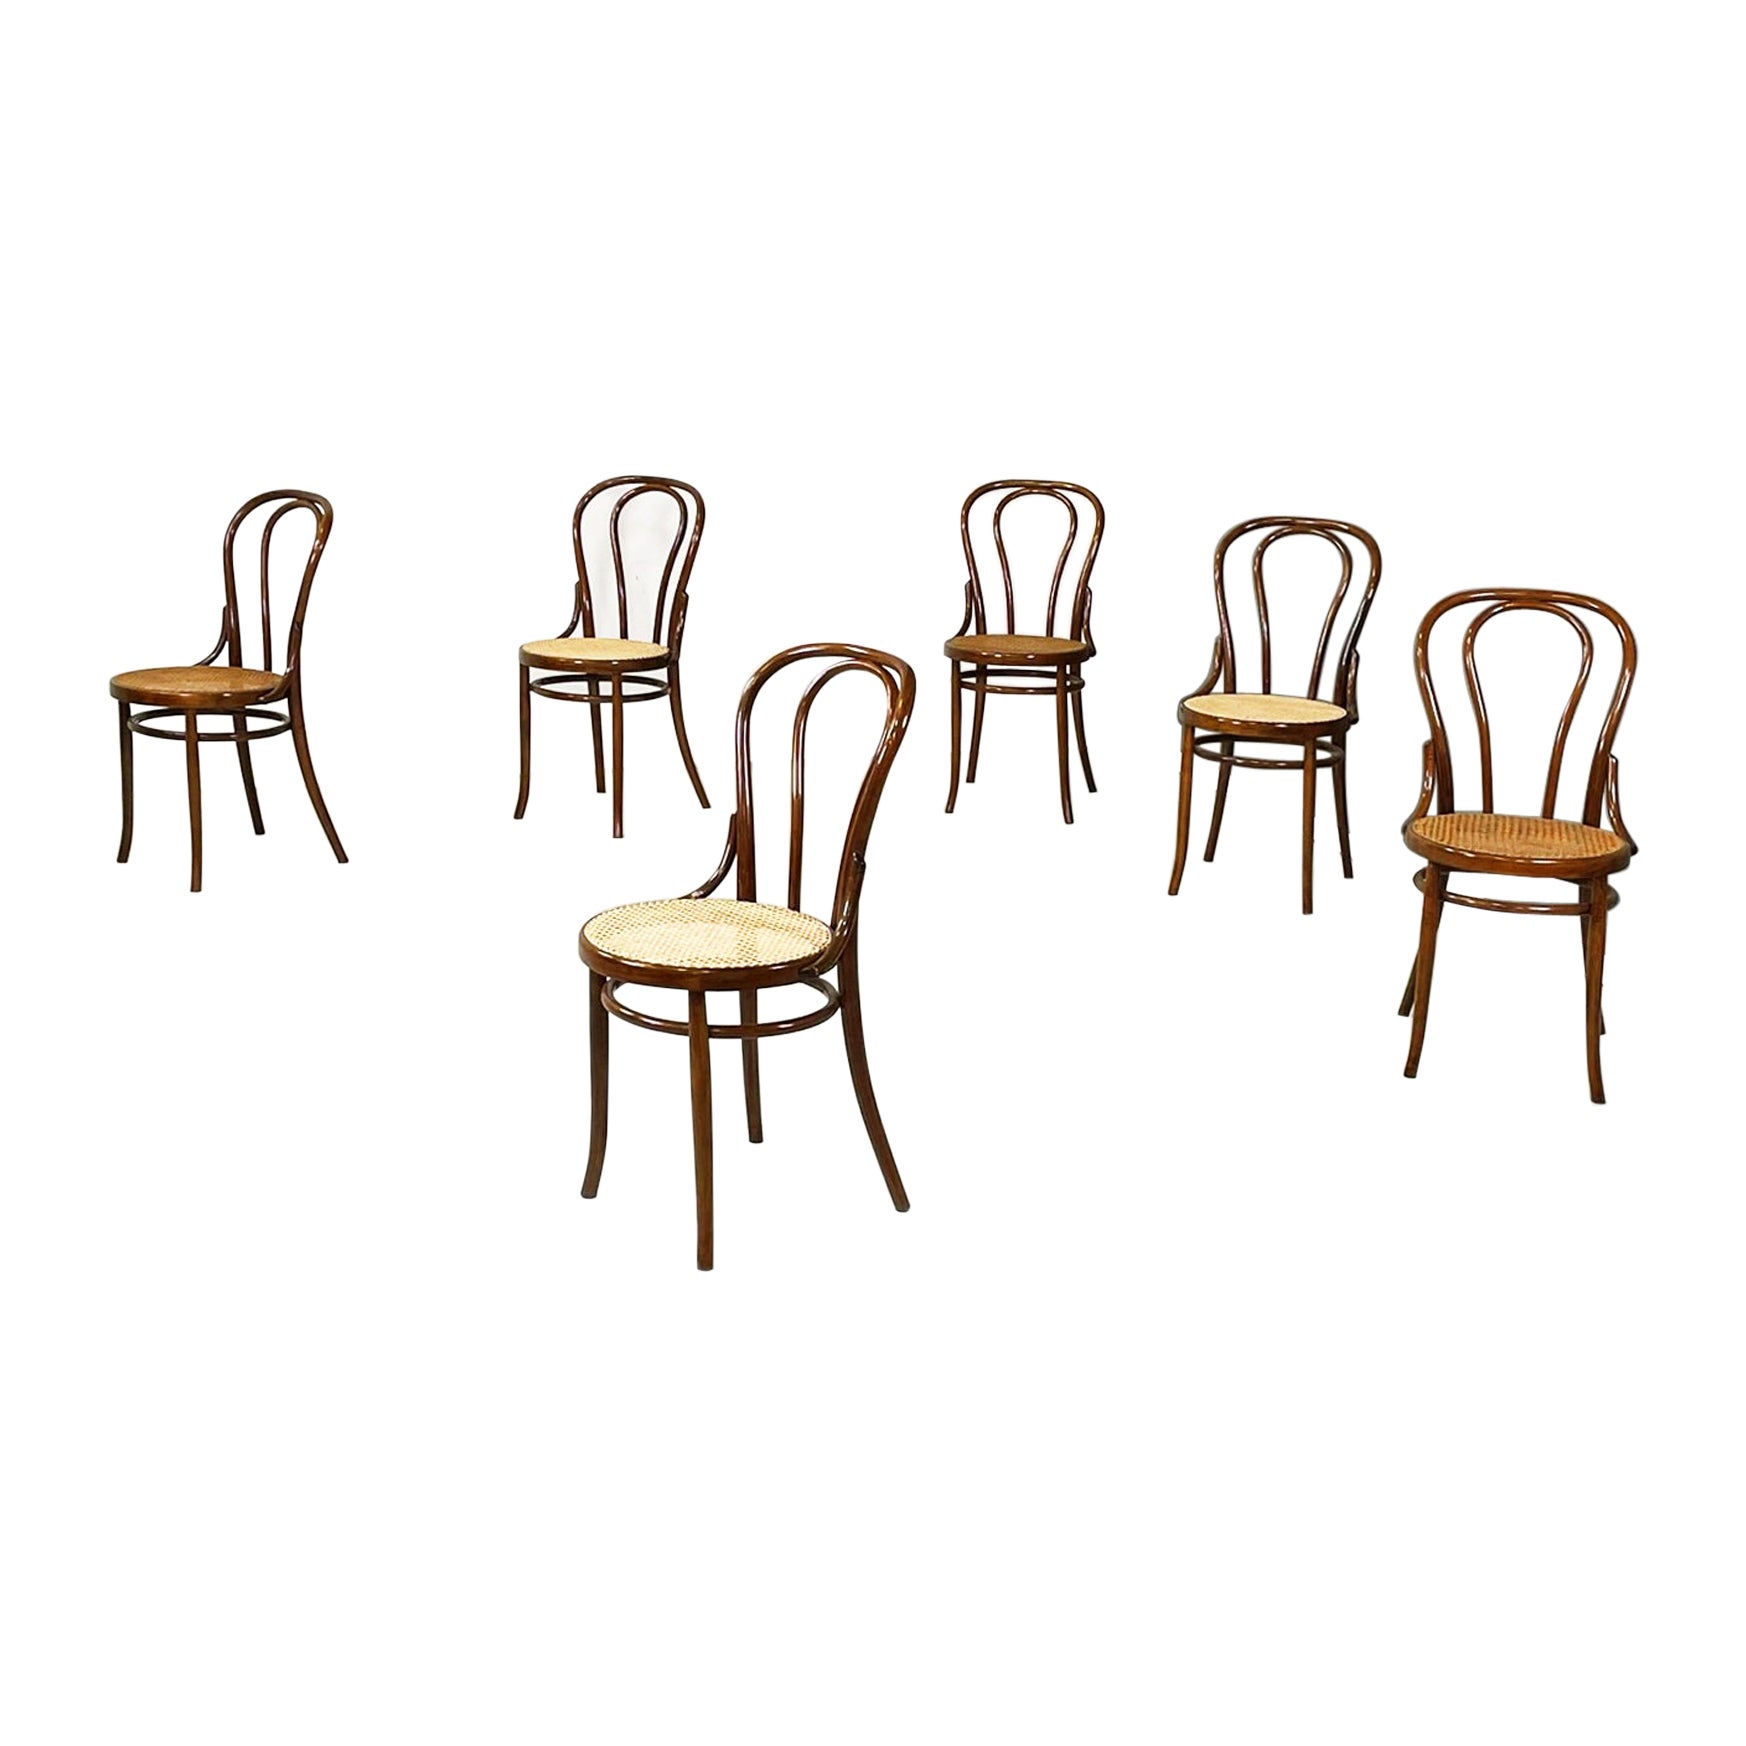 Austrian Chairs Thonet style with Straw and Wood by Salvatore Leone, 1900s For Sale